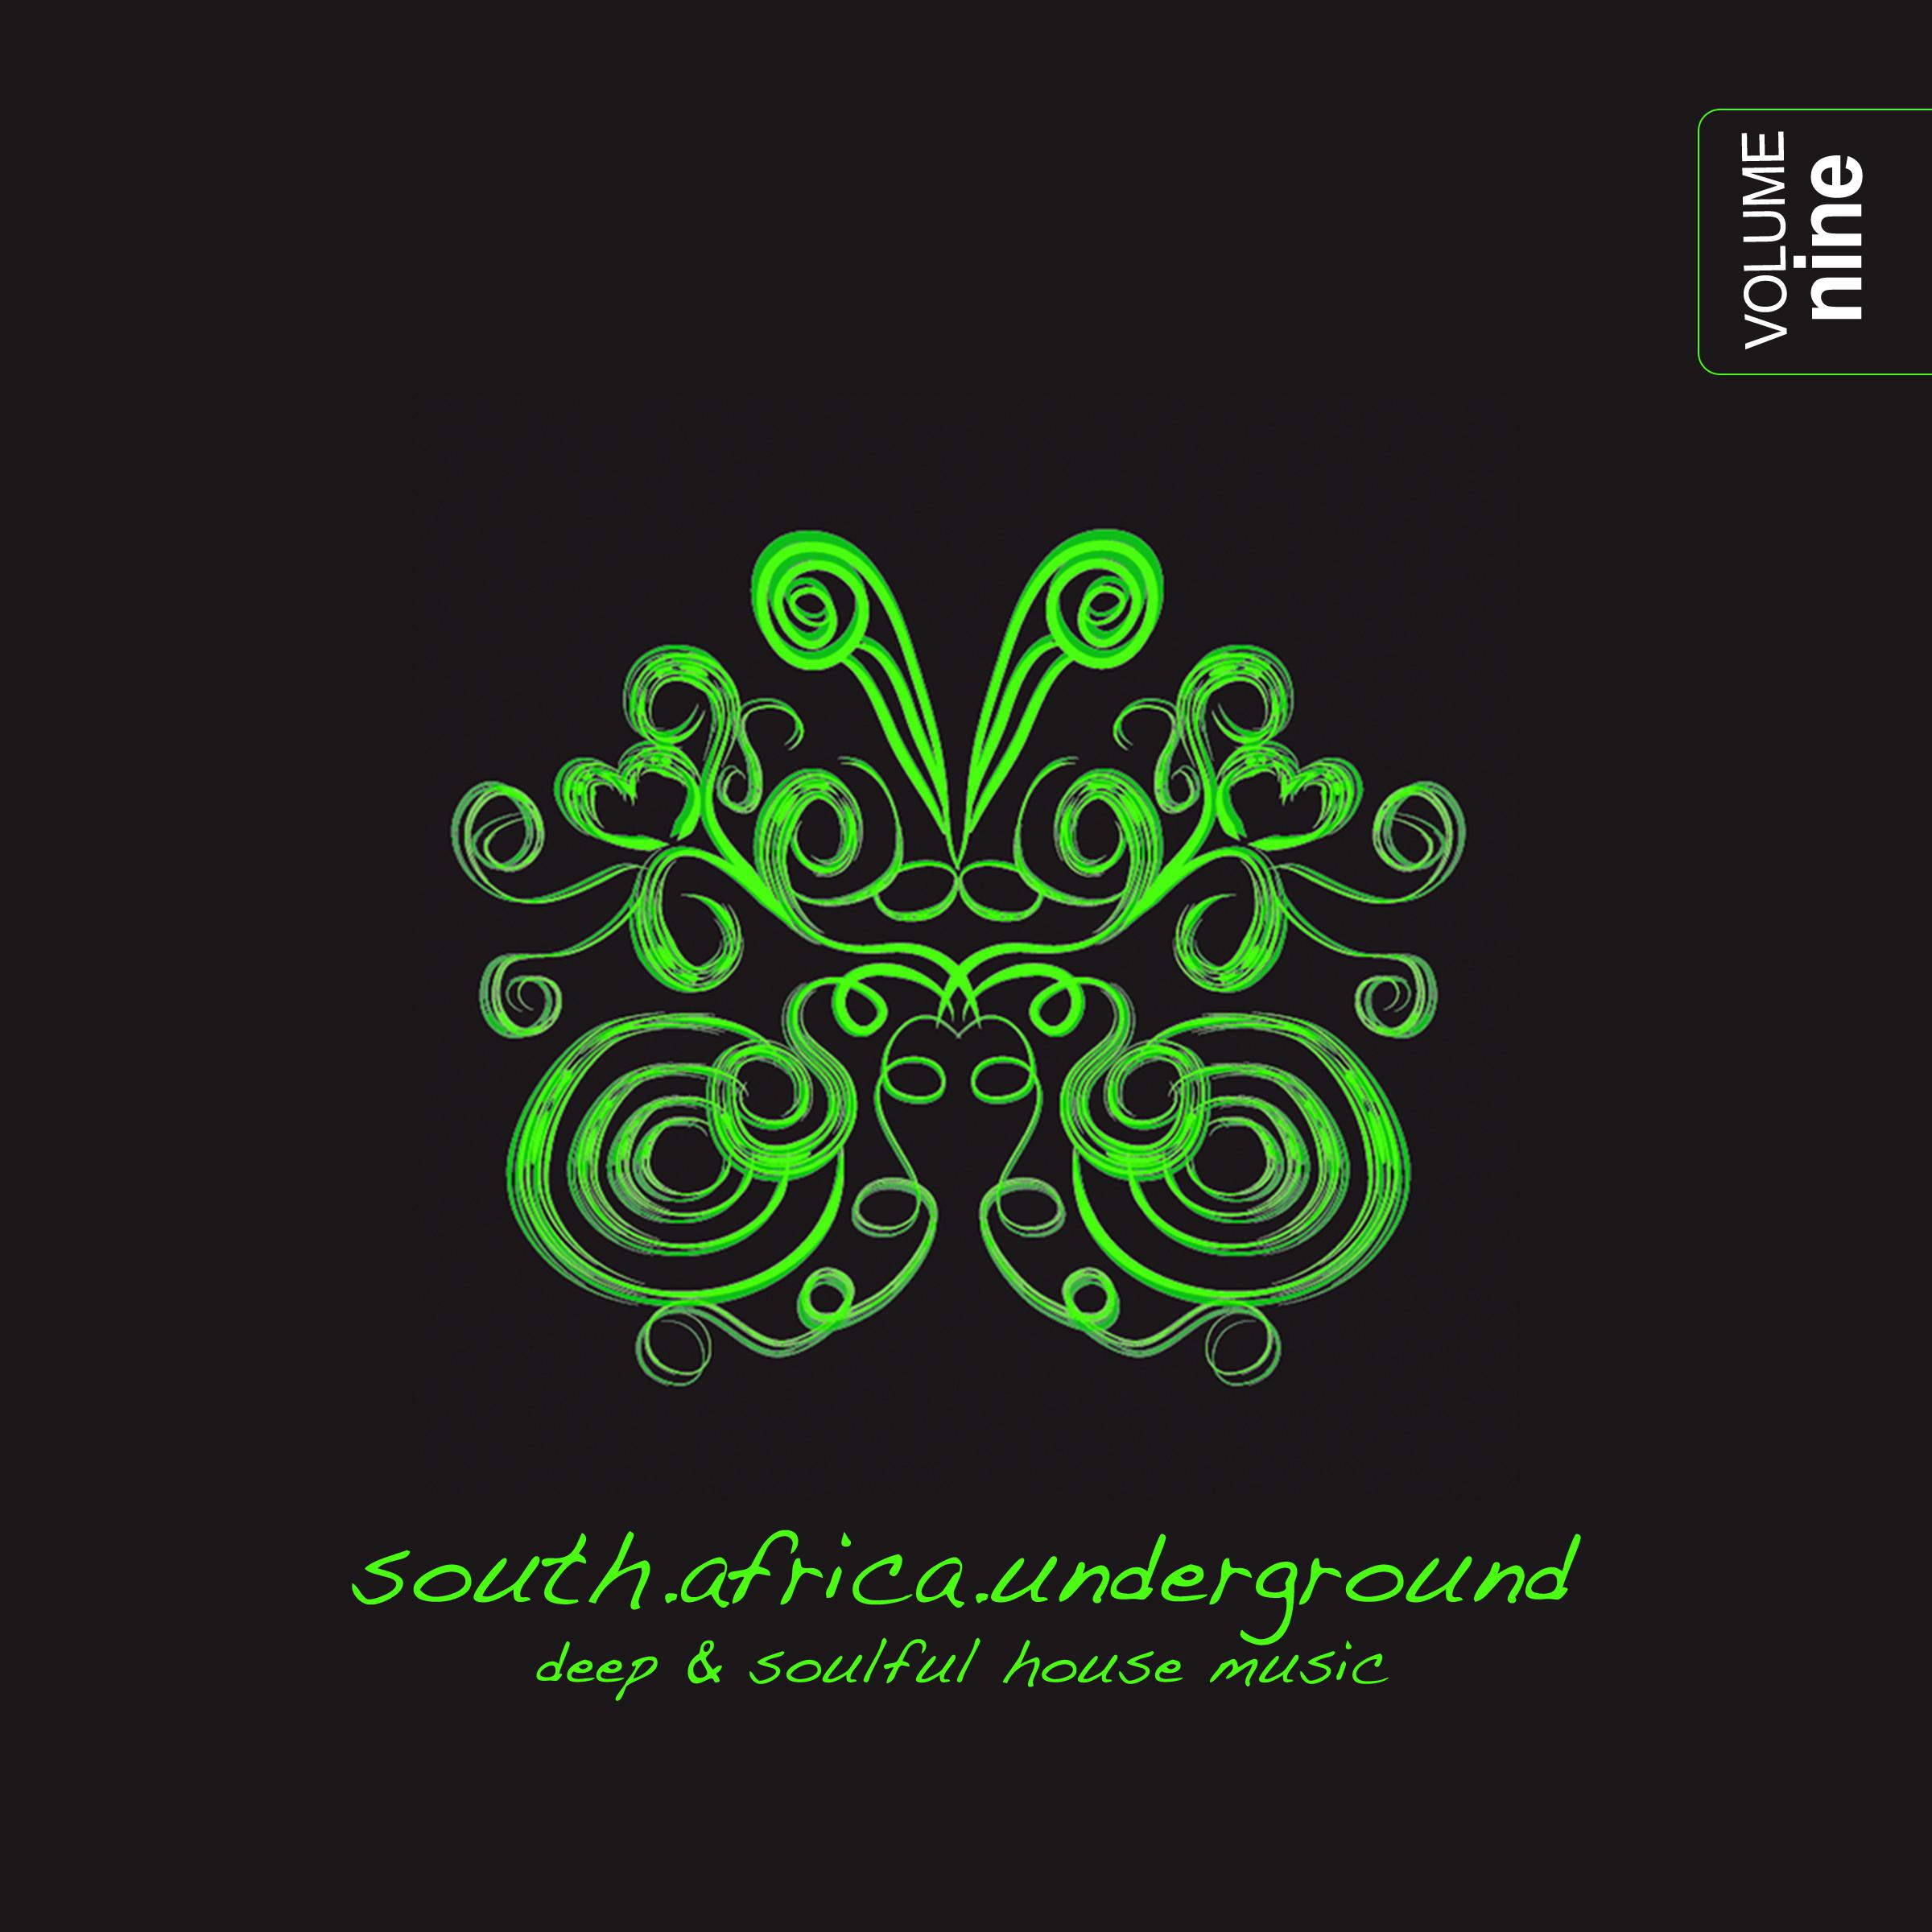 South Africa Underground, Vol. 9 - Deep & Soulful House Music